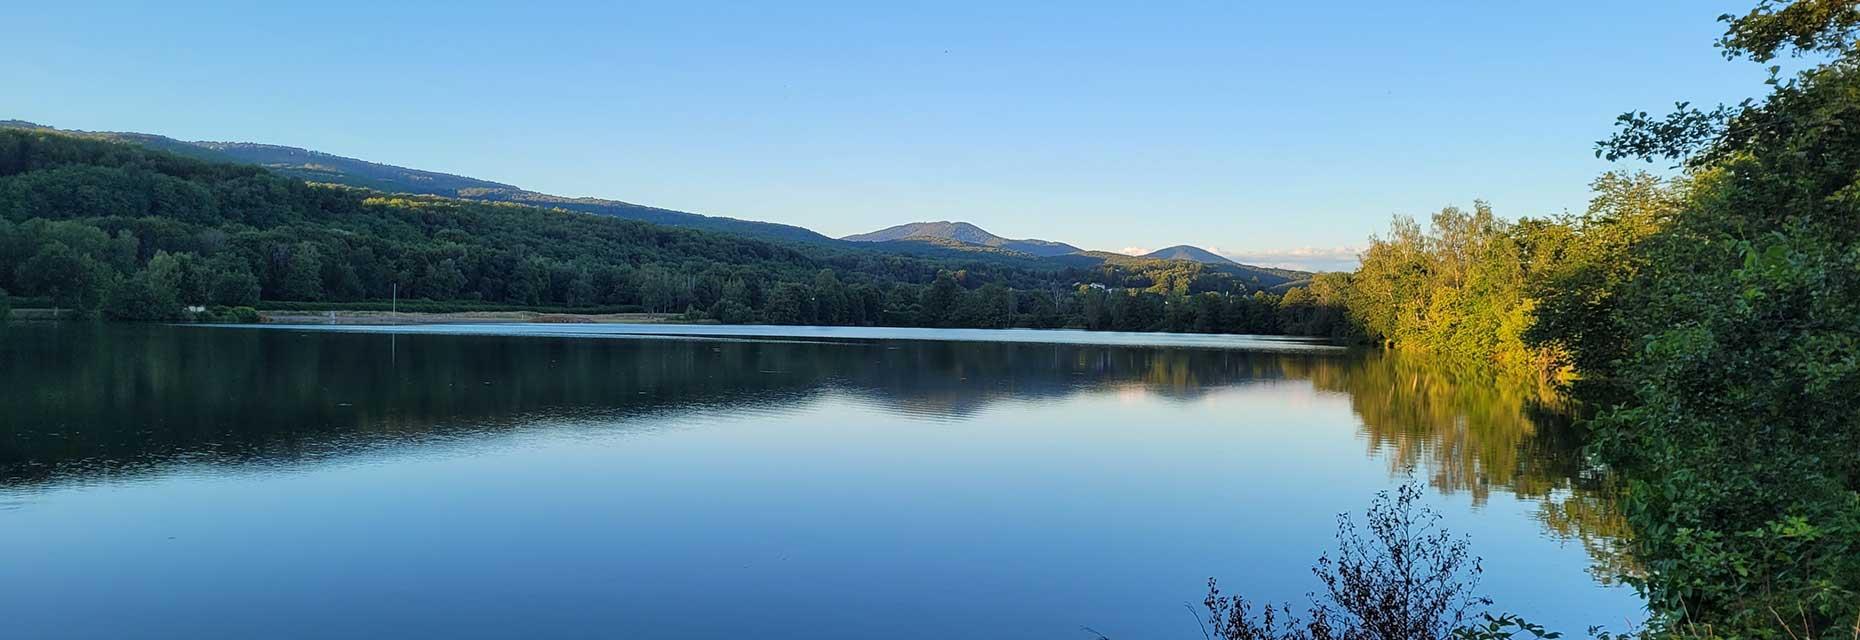 Ballastières lakes in the Southern Vosges